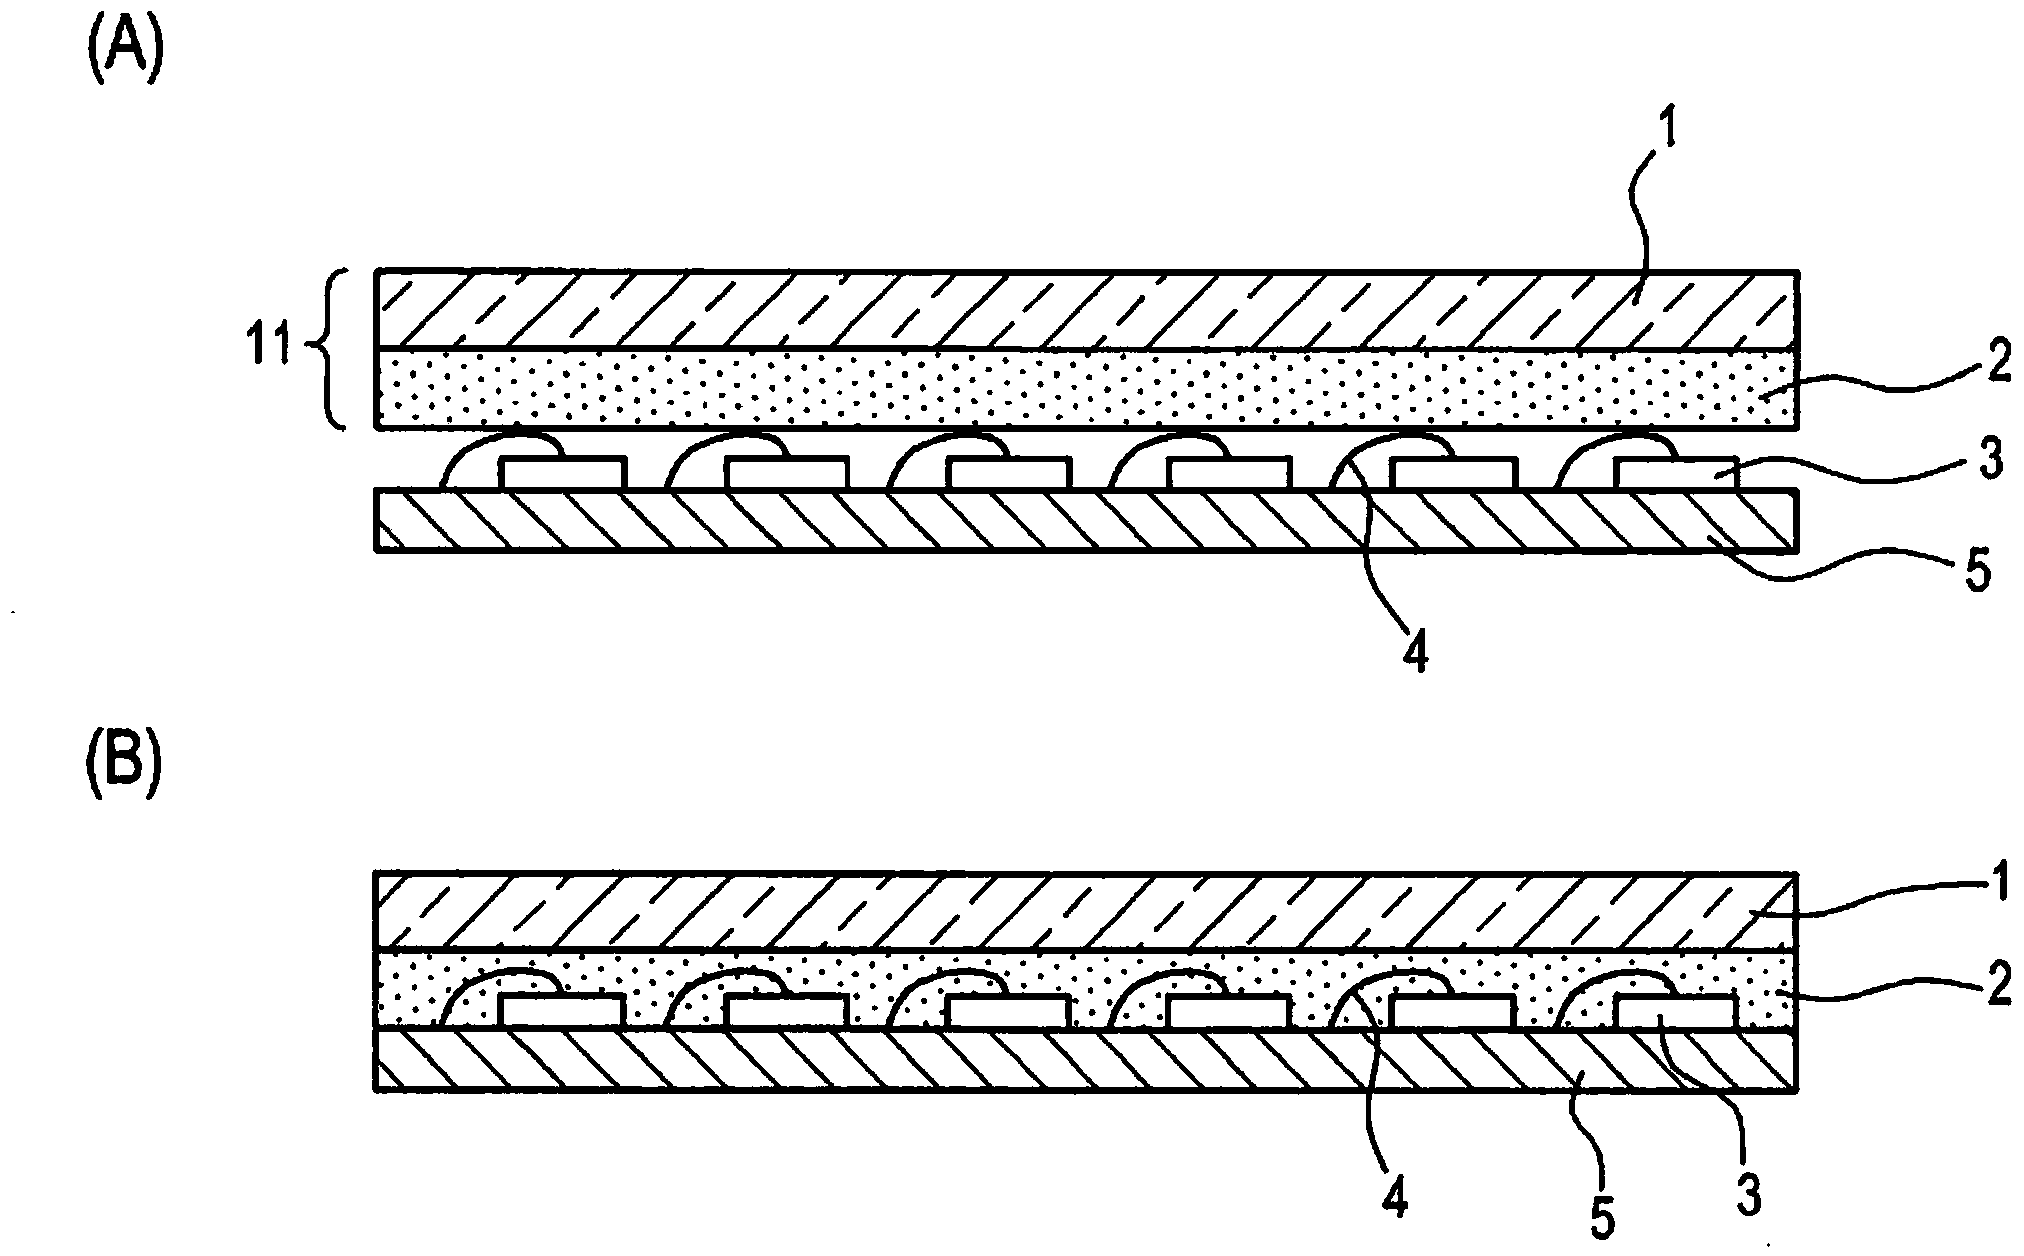 Heat-curable silicone resin sheet having phosphor-containing layer and white pigment-containing layer, method of producing light emitting device using same and encapsulated light emitting semiconductor device produced thereby